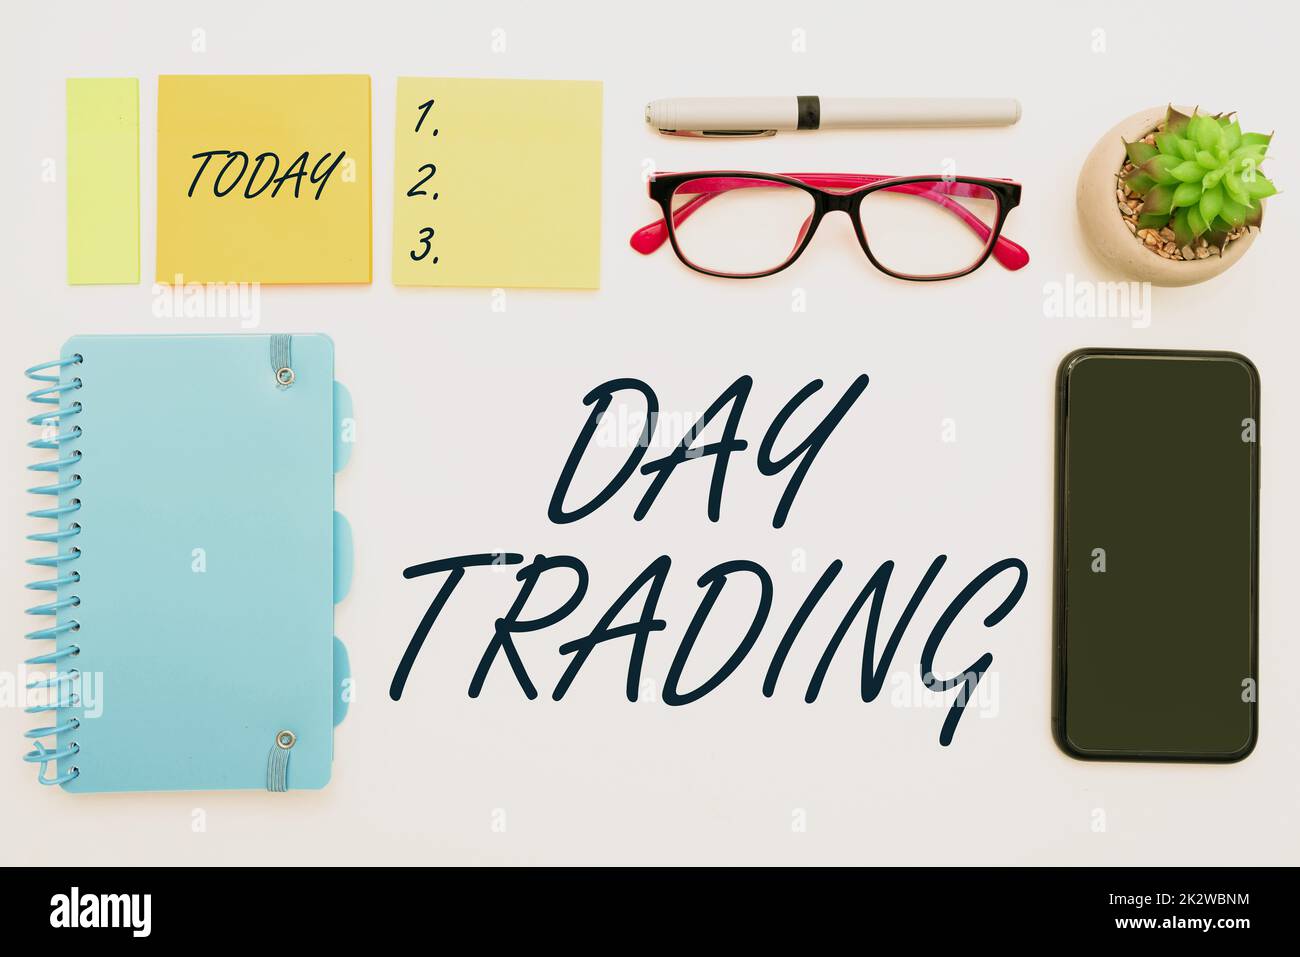 Text sign showing Day Trading. Business concept securities specifically buying and selling financial instruments Flashy School Office Supplies, Teaching Learning Collections, Writing Tools Stock Photo